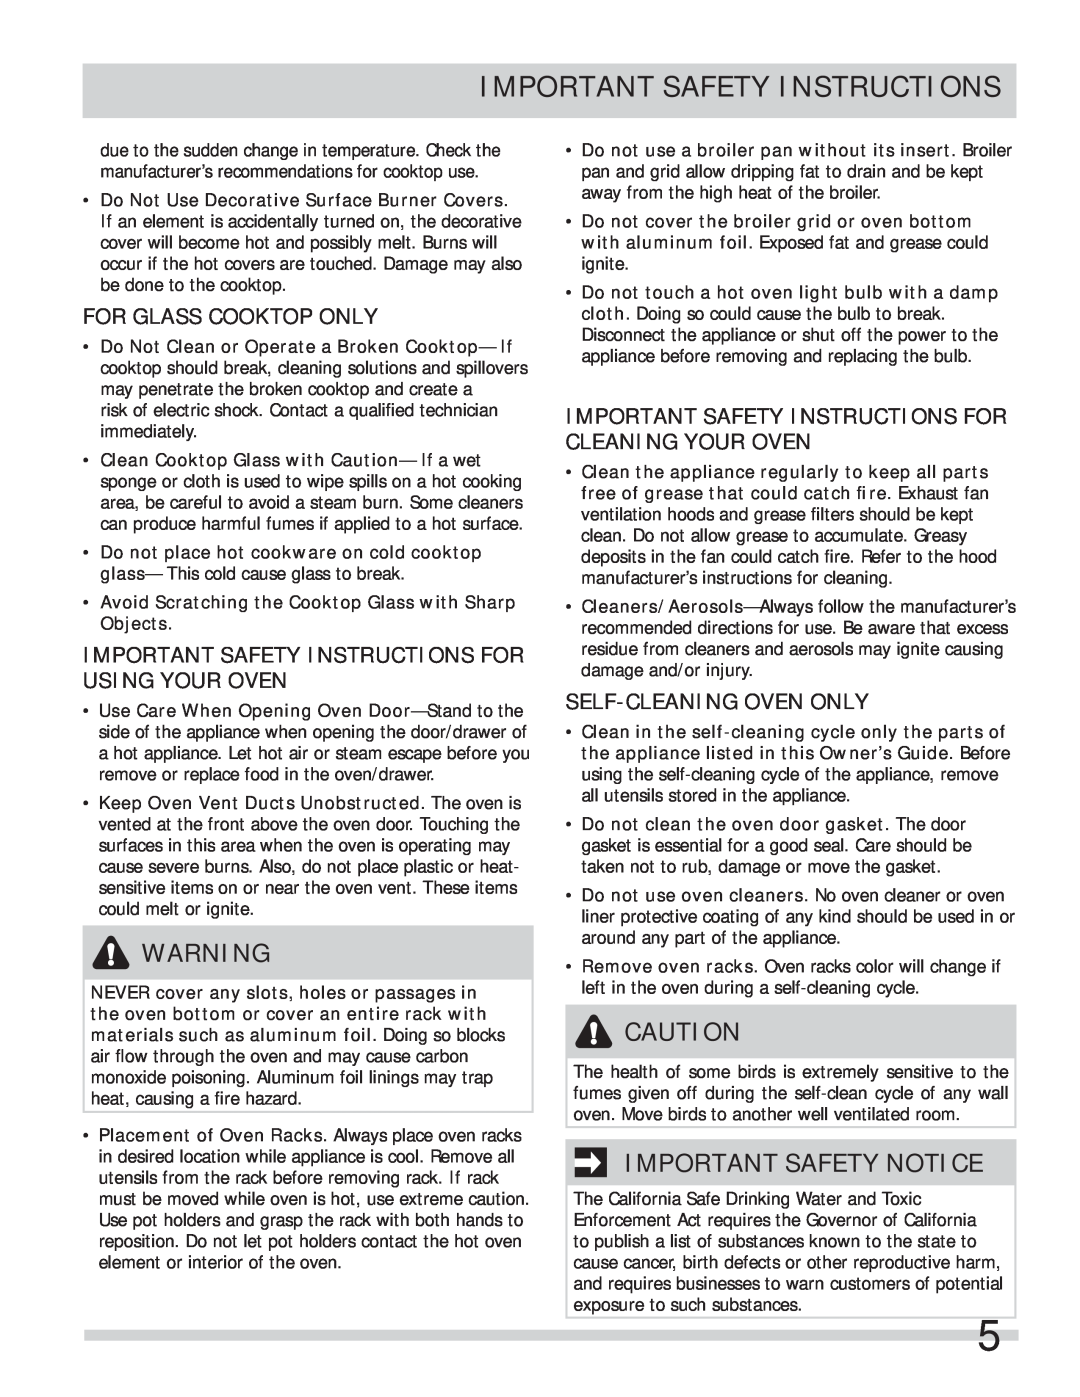 Frigidaire FFEF3000MW Important Safety Notice, For Glass Cooktop Only, Important Safety Instructions For Using Your Oven 